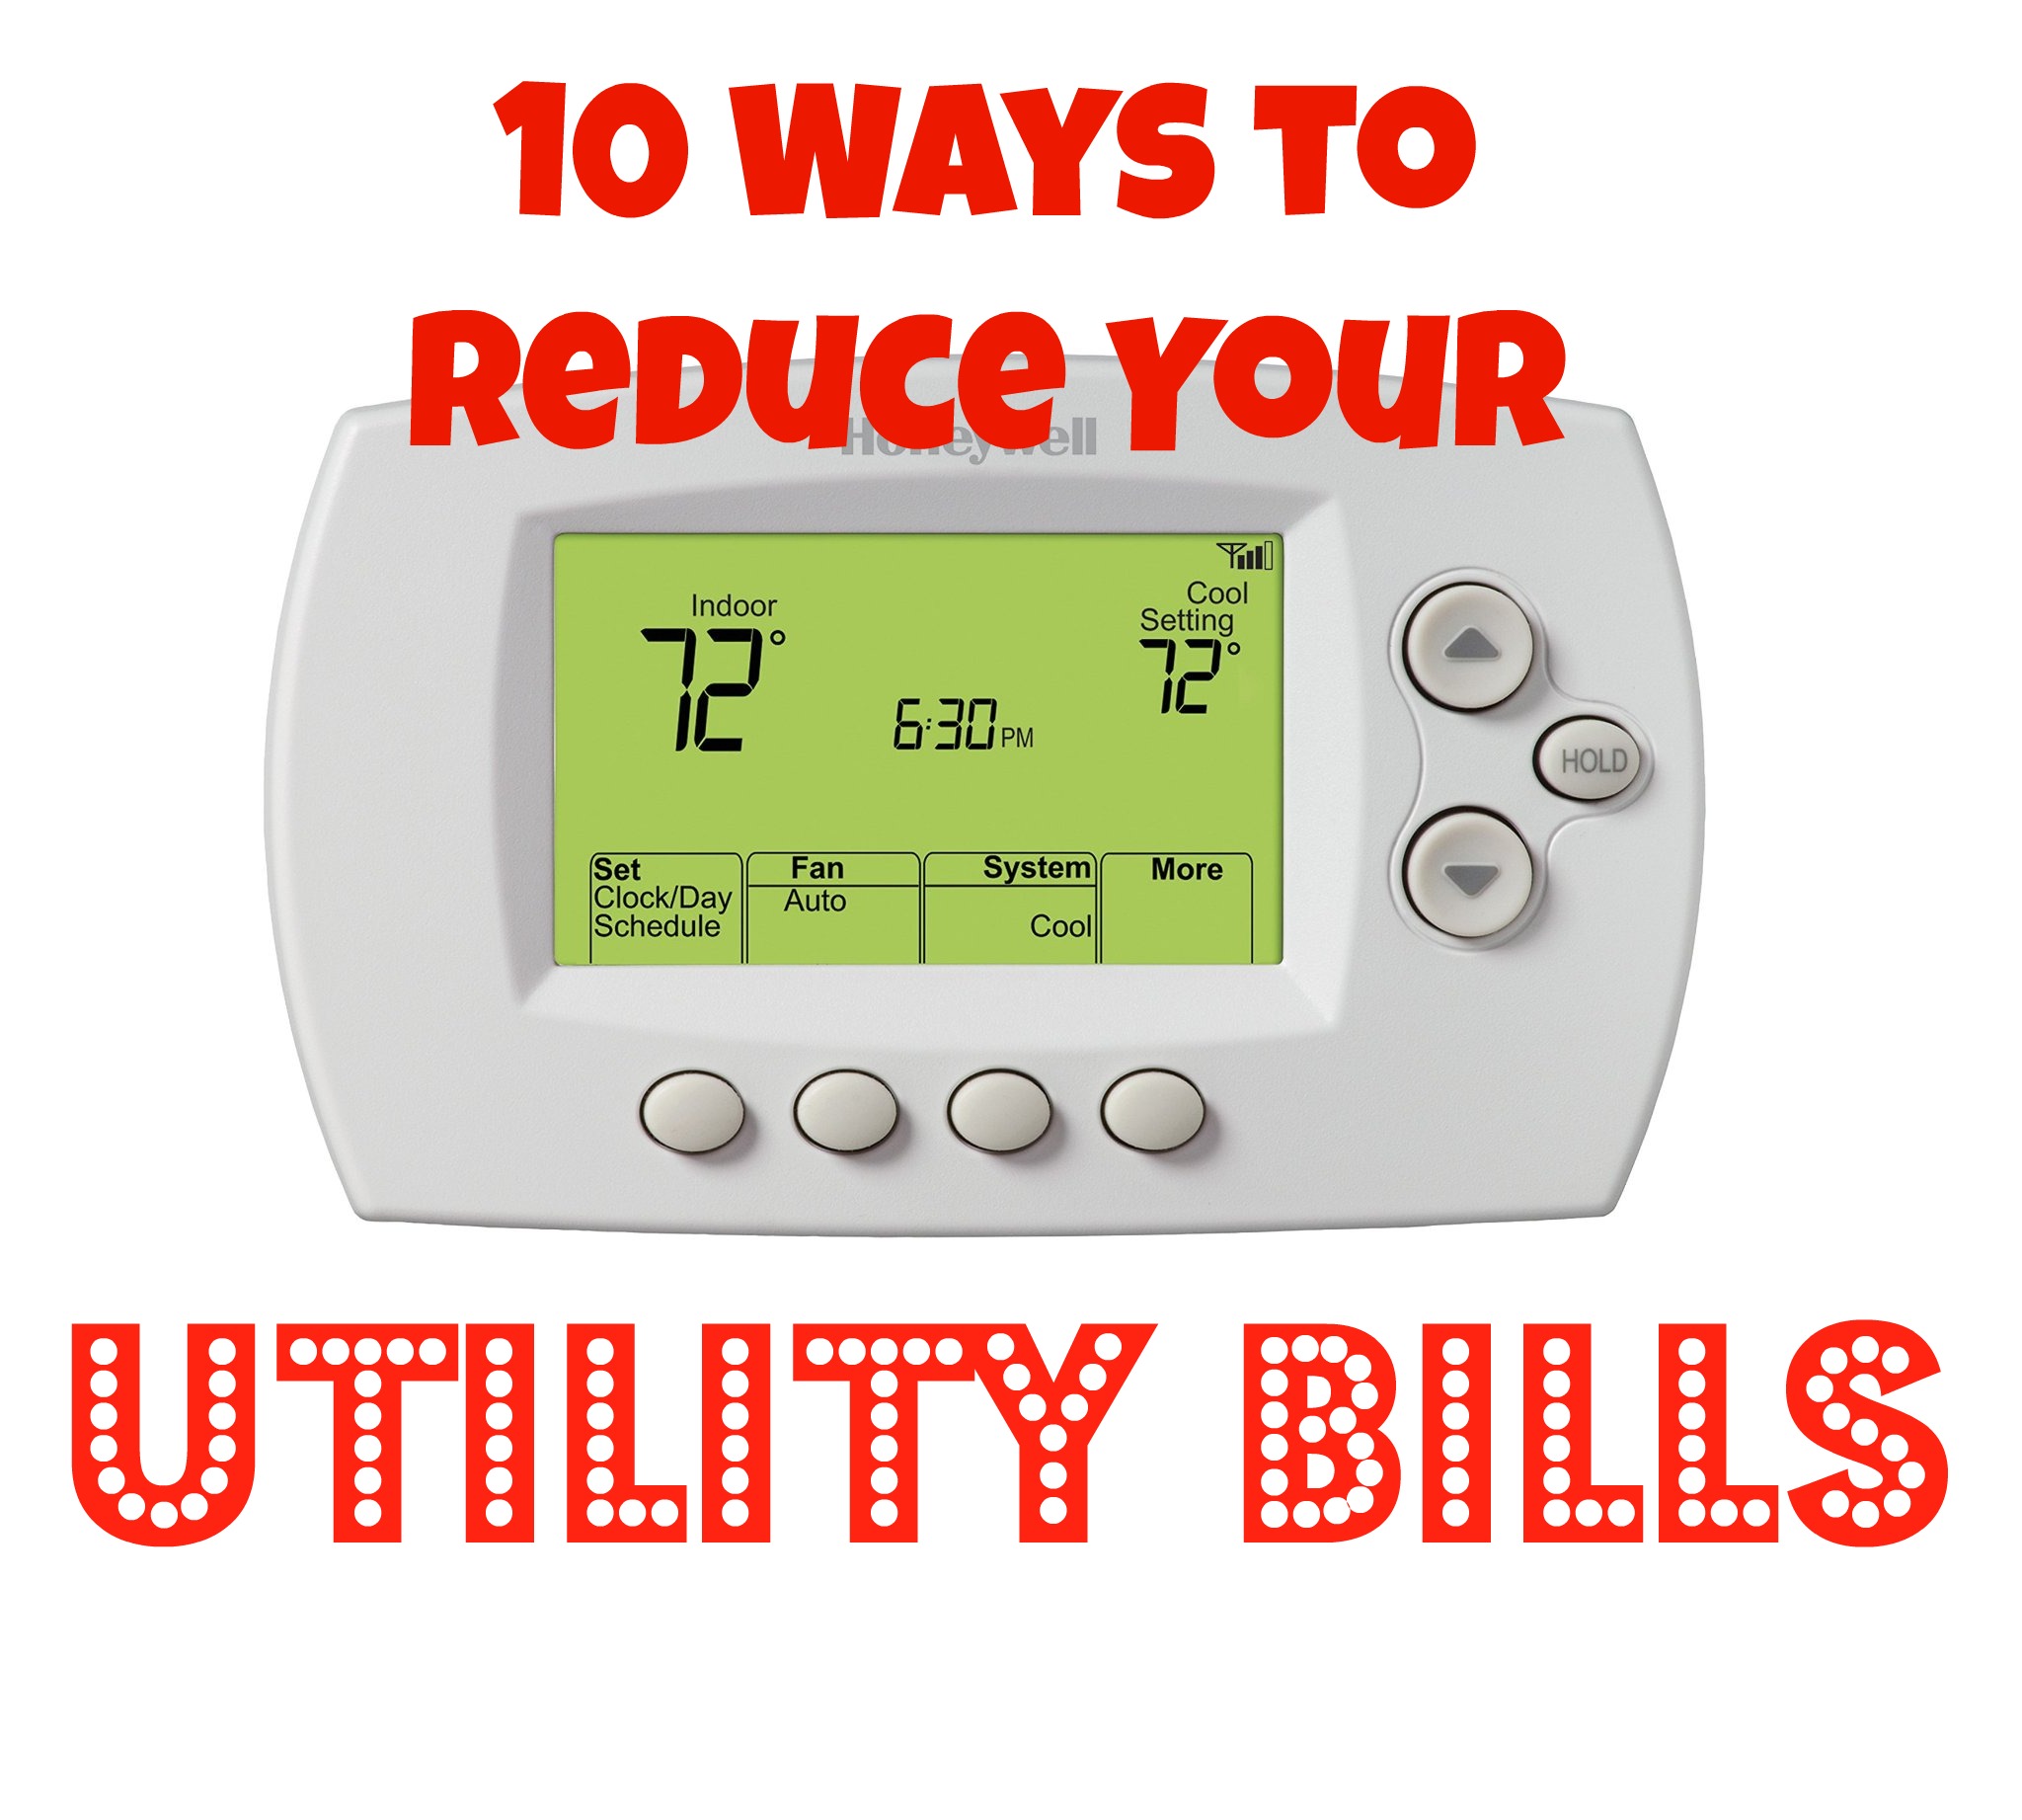 10 Ways to Reduce Your Utility Bills! Pick One and Give it a Try!